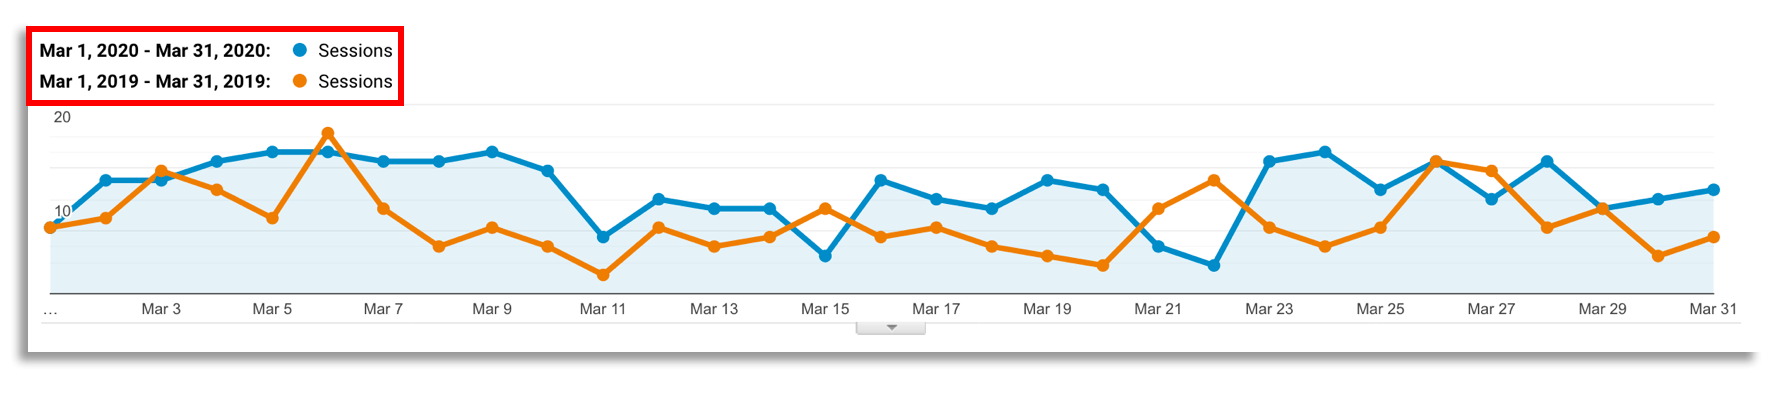 Organic Traffic During COVID-19 (March 2020 vs. March 2019)